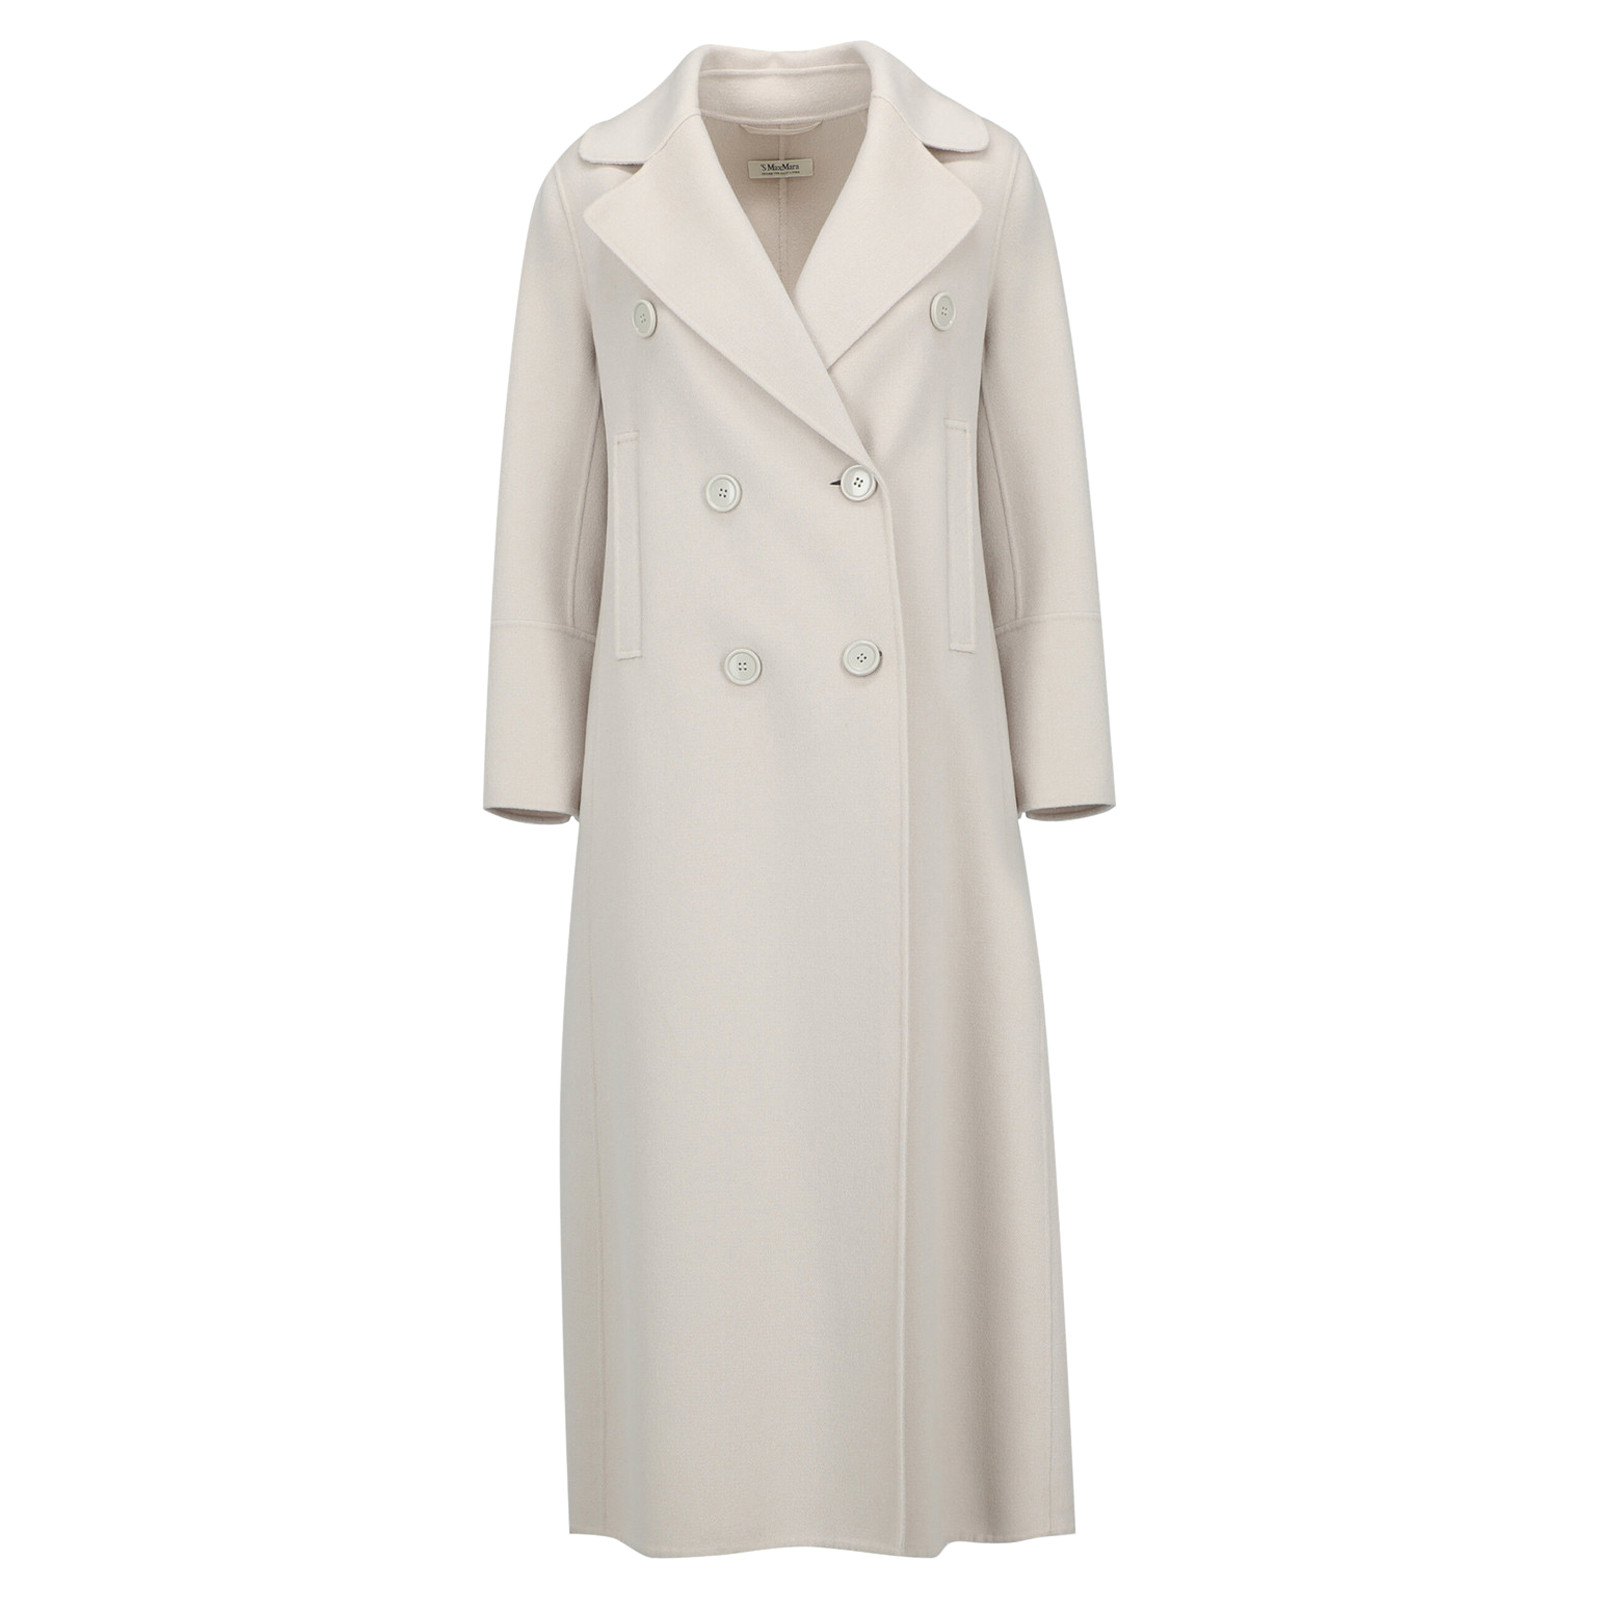 S Max Mara Jacke/Mantel aus Wolle in Beige - Second Hand S Max Mara Jacke/ Mantel aus Wolle in Beige buy used for 275€ (7252186)